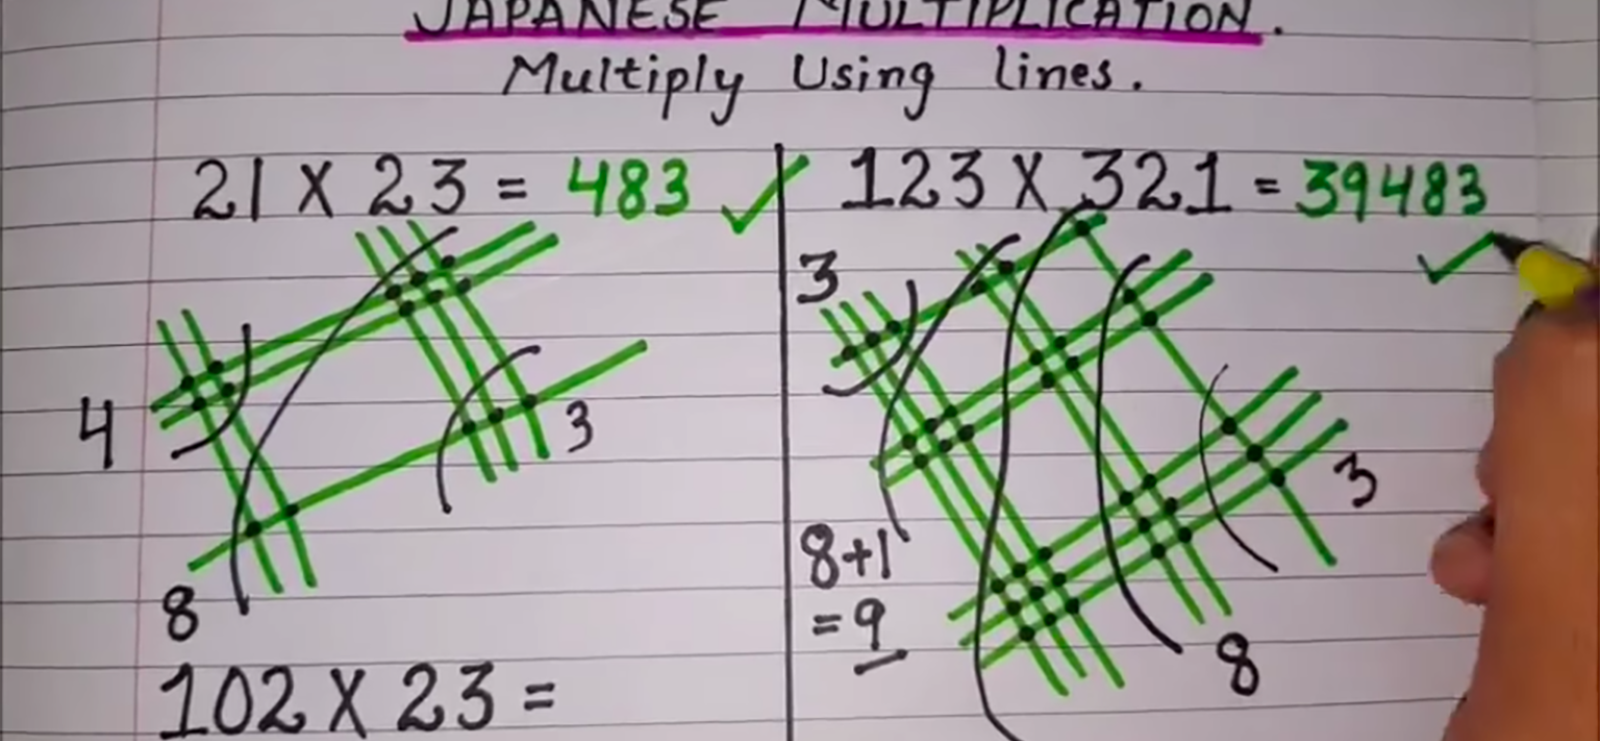  Japanese Multiplication Multiply Using Lines Math Trick Math For Excellence